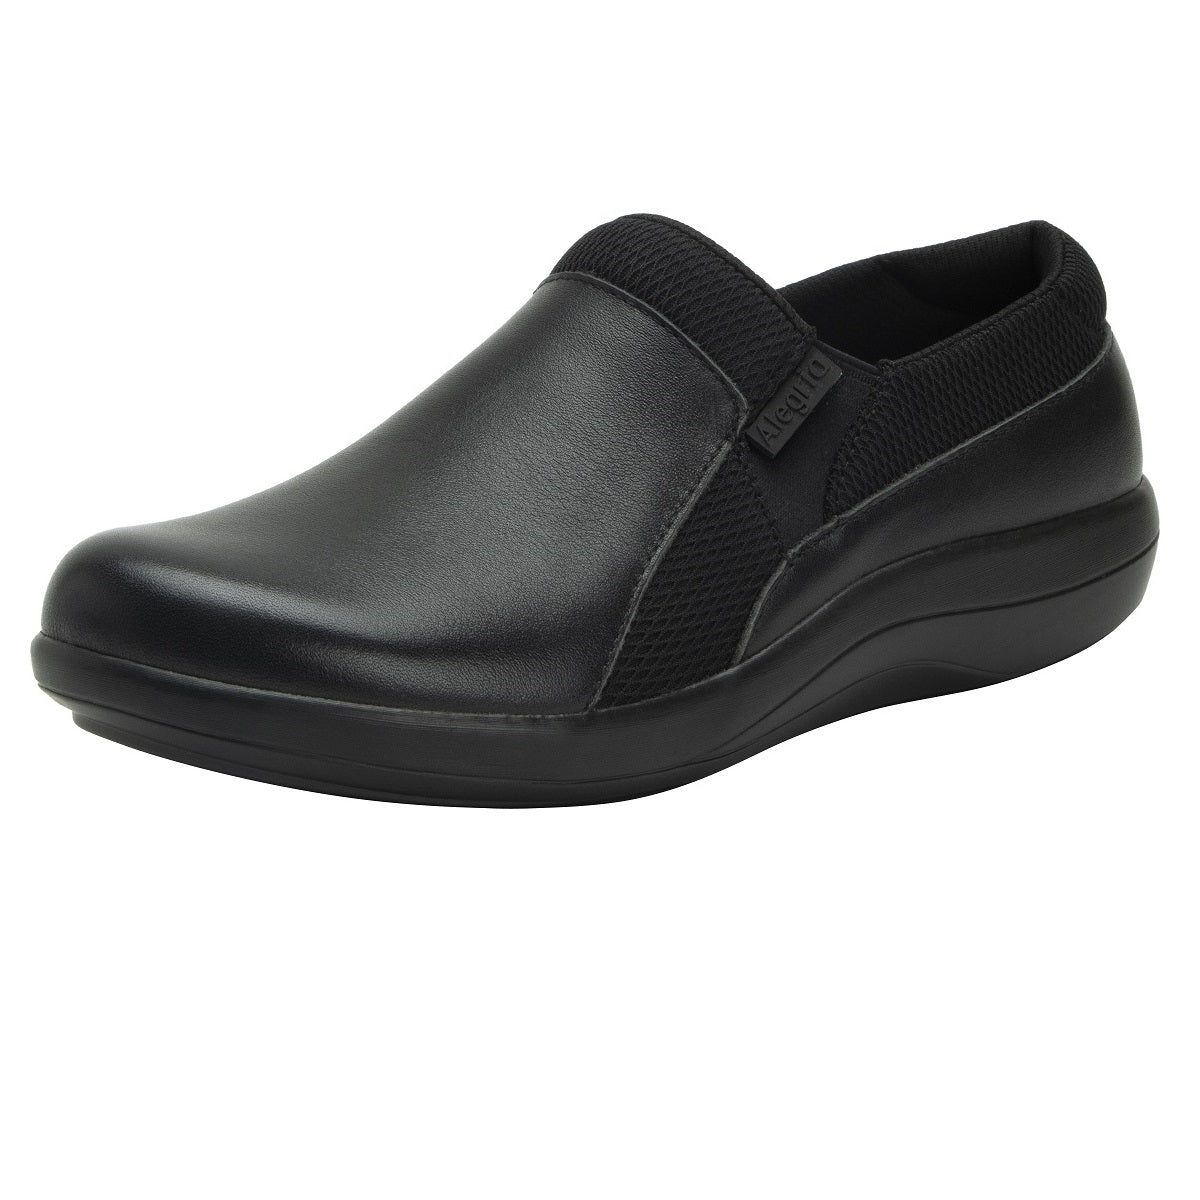 Alegria Duette Shoe in Black at Parker's Clothing and Shoes.